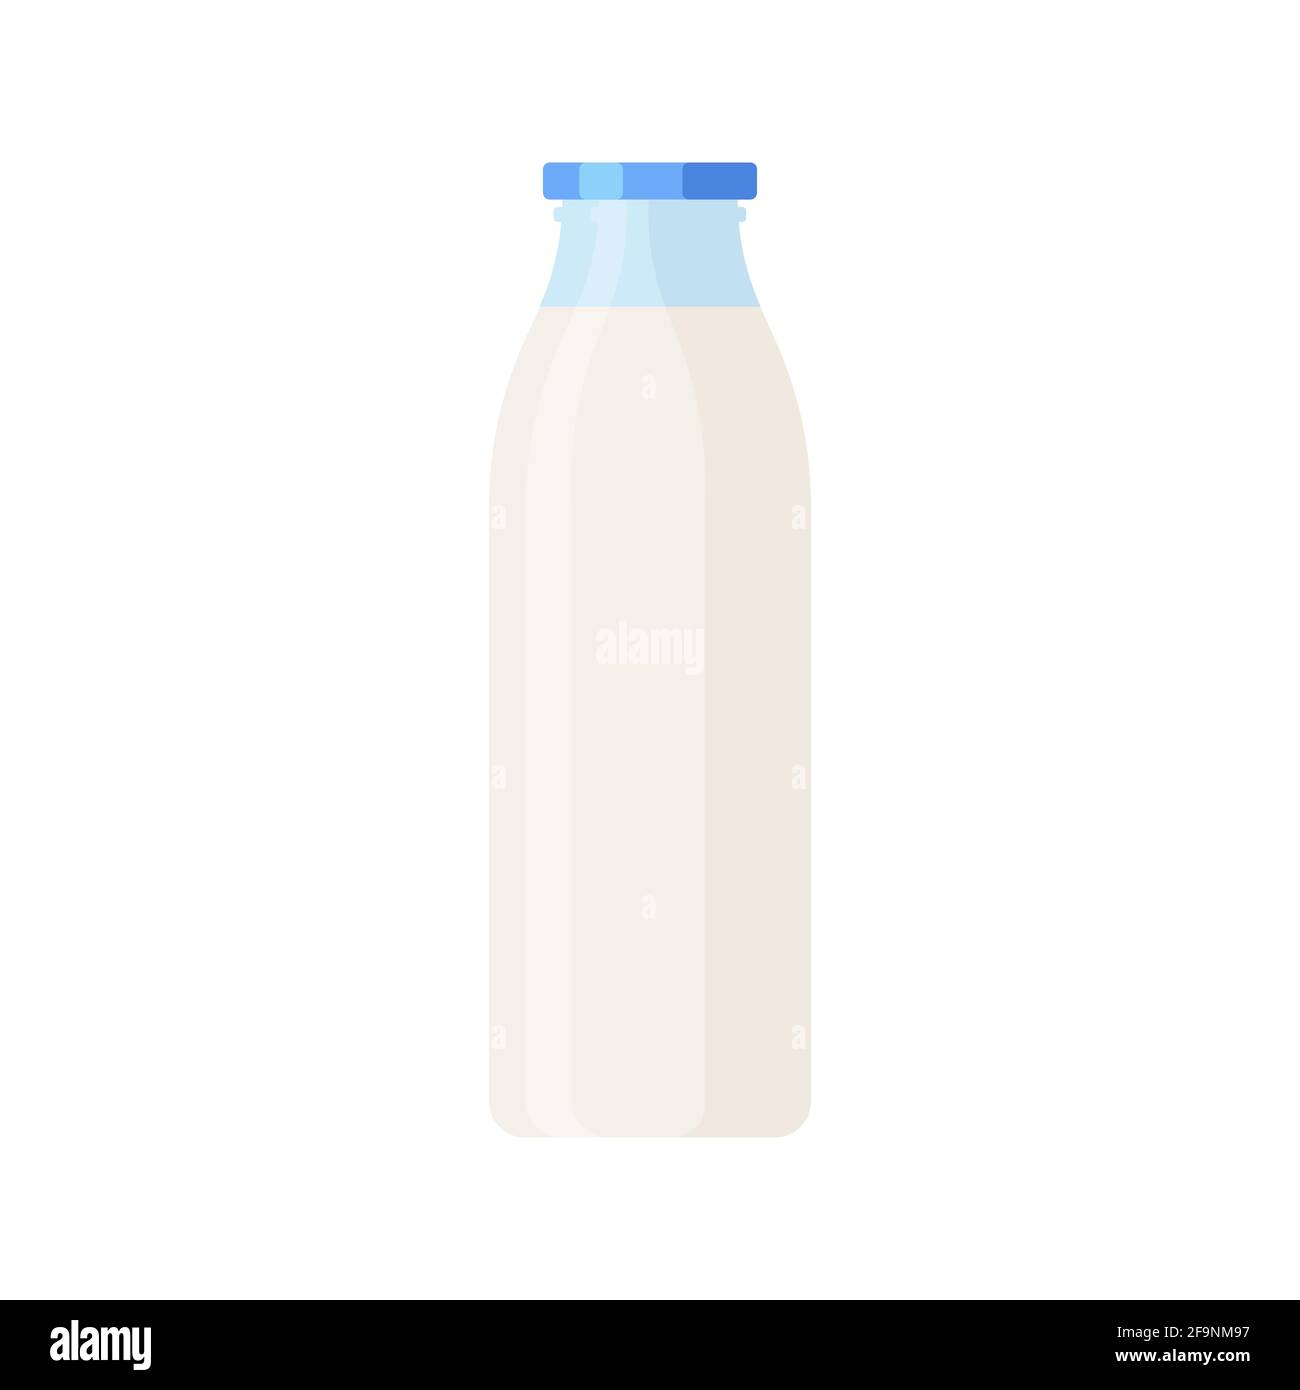 https://c8.alamy.com/comp/2F9NM97/colorful-vector-milk-glass-container-icon-flat-style-template-bottle-of-milk-in-white-and-blue-colors-2F9NM97.jpg